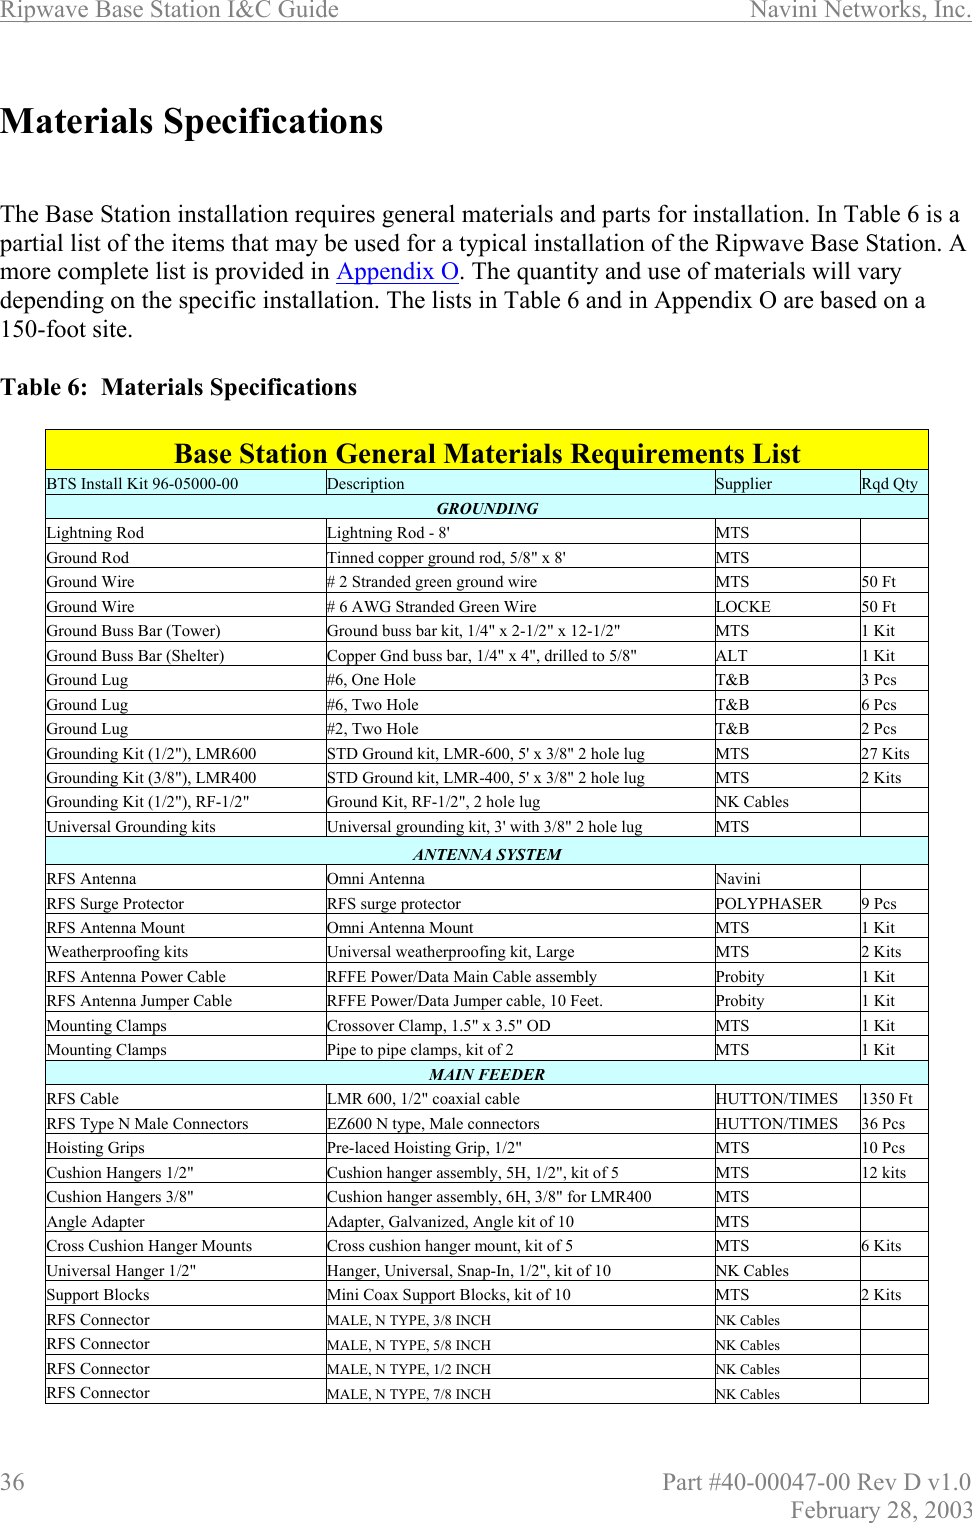 Ripwave Base Station I&amp;C Guide                      Navini Networks, Inc. 36                          Part #40-00047-00 Rev D v1.0 February 28, 2003  Materials Specifications    The Base Station installation requires general materials and parts for installation. In Table 6 is a partial list of the items that may be used for a typical installation of the Ripwave Base Station. A more complete list is provided in Appendix O. The quantity and use of materials will vary depending on the specific installation. The lists in Table 6 and in Appendix O are based on a 150-foot site.   Table 6:  Materials Specifications  Base Station General Materials Requirements List BTS Install Kit 96-05000-00  Description  Supplier  Rqd Qty GROUNDING Lightning Rod  Lightning Rod - 8&apos;  MTS    Ground Rod  Tinned copper ground rod, 5/8&quot; x 8&apos;  MTS    Ground Wire  # 2 Stranded green ground wire  MTS  50 Ft Ground Wire  # 6 AWG Stranded Green Wire  LOCKE  50 Ft Ground Buss Bar (Tower)  Ground buss bar kit, 1/4&quot; x 2-1/2&quot; x 12-1/2&quot;  MTS  1 Kit Ground Buss Bar (Shelter)  Copper Gnd buss bar, 1/4&quot; x 4&quot;, drilled to 5/8&quot;  ALT  1 Kit Ground Lug  #6, One Hole  T&amp;B  3 Pcs Ground Lug  #6, Two Hole  T&amp;B  6 Pcs Ground Lug  #2, Two Hole  T&amp;B  2 Pcs Grounding Kit (1/2&quot;), LMR600  STD Ground kit, LMR-600, 5&apos; x 3/8&quot; 2 hole lug  MTS  27 Kits Grounding Kit (3/8&quot;), LMR400  STD Ground kit, LMR-400, 5&apos; x 3/8&quot; 2 hole lug  MTS  2 Kits Grounding Kit (1/2&quot;), RF-1/2&quot;  Ground Kit, RF-1/2&quot;, 2 hole lug NK Cables    Universal Grounding kits  Universal grounding kit, 3&apos; with 3/8&quot; 2 hole lug  MTS    ANTENNA SYSTEM RFS Antenna  Omni Antenna Navini   RFS Surge Protector  RFS surge protector  POLYPHASER  9 Pcs RFS Antenna Mount  Omni Antenna Mount  MTS  1 Kit Weatherproofing kits  Universal weatherproofing kit, Large   MTS  2 Kits RFS Antenna Power Cable  RFFE Power/Data Main Cable assembly  Probity  1 Kit RFS Antenna Jumper Cable  RFFE Power/Data Jumper cable, 10 Feet.  Probity  1 Kit Mounting Clamps  Crossover Clamp, 1.5&quot; x 3.5&quot; OD  MTS  1 Kit Mounting Clamps  Pipe to pipe clamps, kit of 2  MTS  1 Kit MAIN FEEDER RFS Cable  LMR 600, 1/2&quot; coaxial cable  HUTTON/TIMES  1350 Ft RFS Type N Male Connectors  EZ600 N type, Male connectors  HUTTON/TIMES  36 Pcs Hoisting Grips  Pre-laced Hoisting Grip, 1/2&quot;   MTS  10 Pcs Cushion Hangers 1/2&quot;  Cushion hanger assembly, 5H, 1/2&quot;, kit of 5  MTS  12 kits Cushion Hangers 3/8&quot;  Cushion hanger assembly, 6H, 3/8&quot; for LMR400  MTS    Angle Adapter  Adapter, Galvanized, Angle kit of 10  MTS    Cross Cushion Hanger Mounts  Cross cushion hanger mount, kit of 5  MTS  6 Kits Universal Hanger 1/2&quot;  Hanger, Universal, Snap-In, 1/2&quot;, kit of 10 NK Cables    Support Blocks  Mini Coax Support Blocks, kit of 10  MTS  2 Kits RFS Connector  MALE, N TYPE, 3/8 INCH NK Cables    RFS Connector  MALE, N TYPE, 5/8 INCH NK Cables    RFS Connector  MALE, N TYPE, 1/2 INCH NK Cables    RFS Connector  MALE, N TYPE, 7/8 INCH NK Cables    